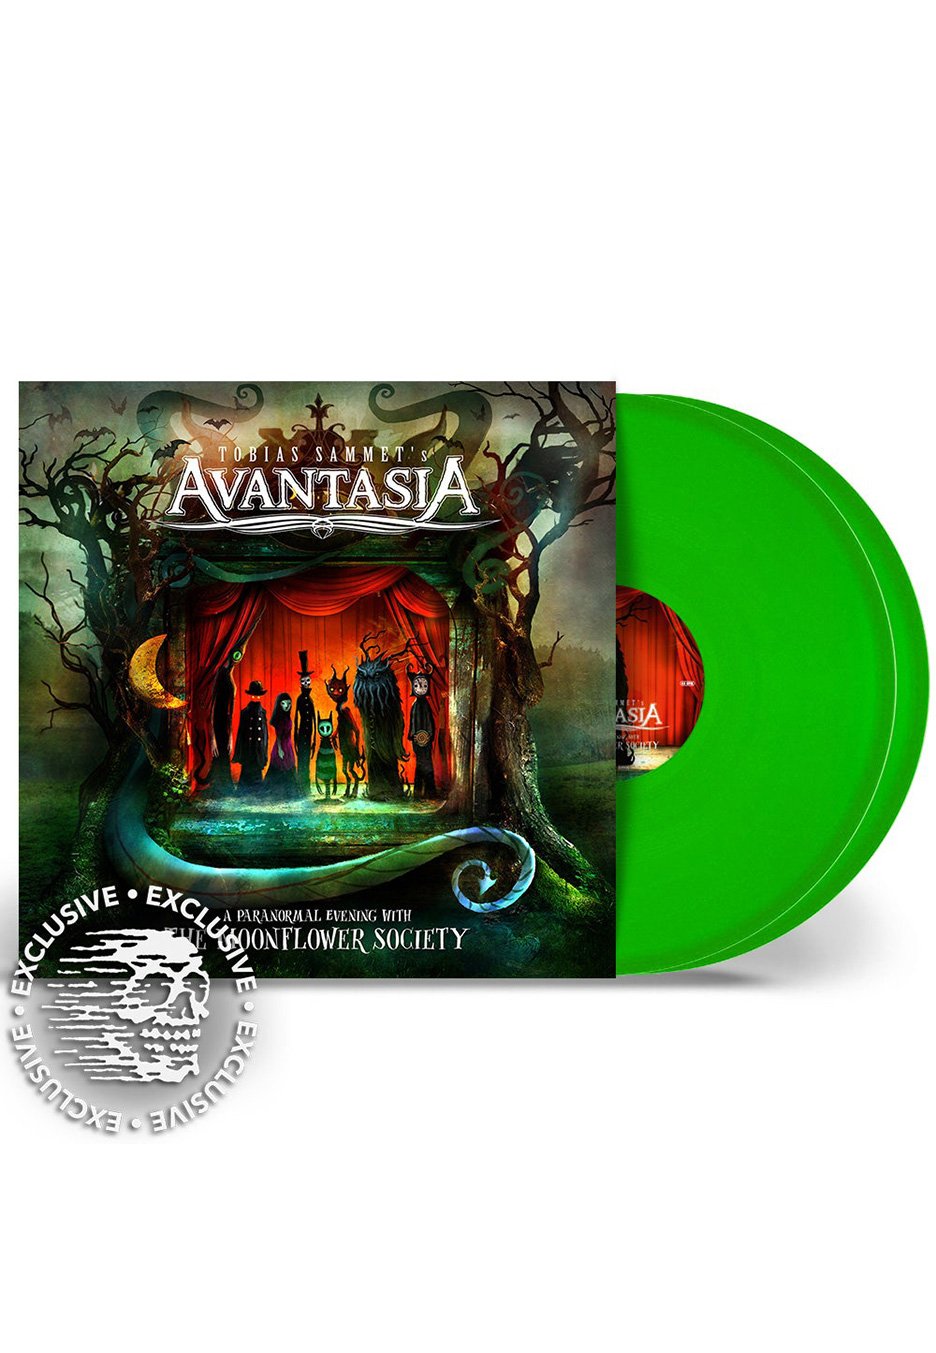 Avantasia - A Paranormal Evening With The Moonflower Society Ltd. Green - Colored 2 Vinyl